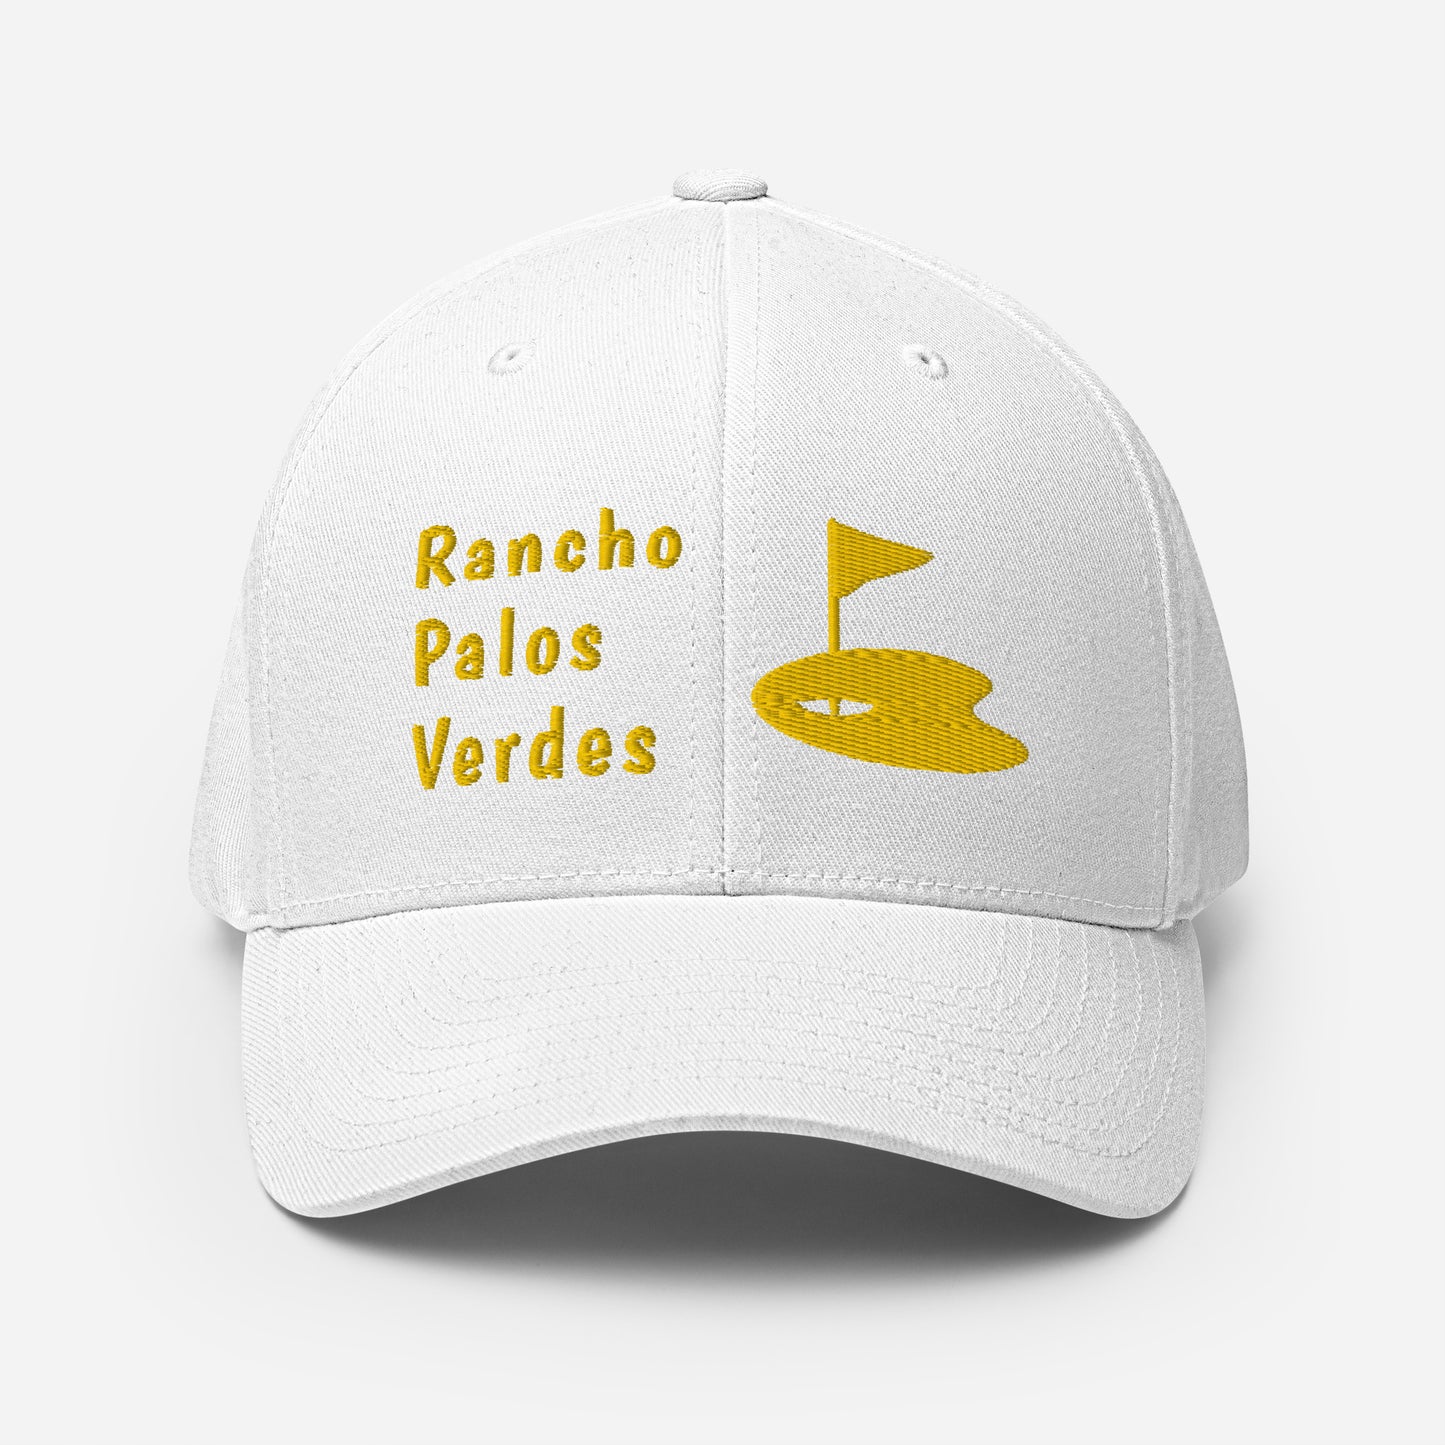 Rancho Palos Verdes - California - 90275 - Structured Twill Cap (Printed Front and Back R.P.V. GOLF)